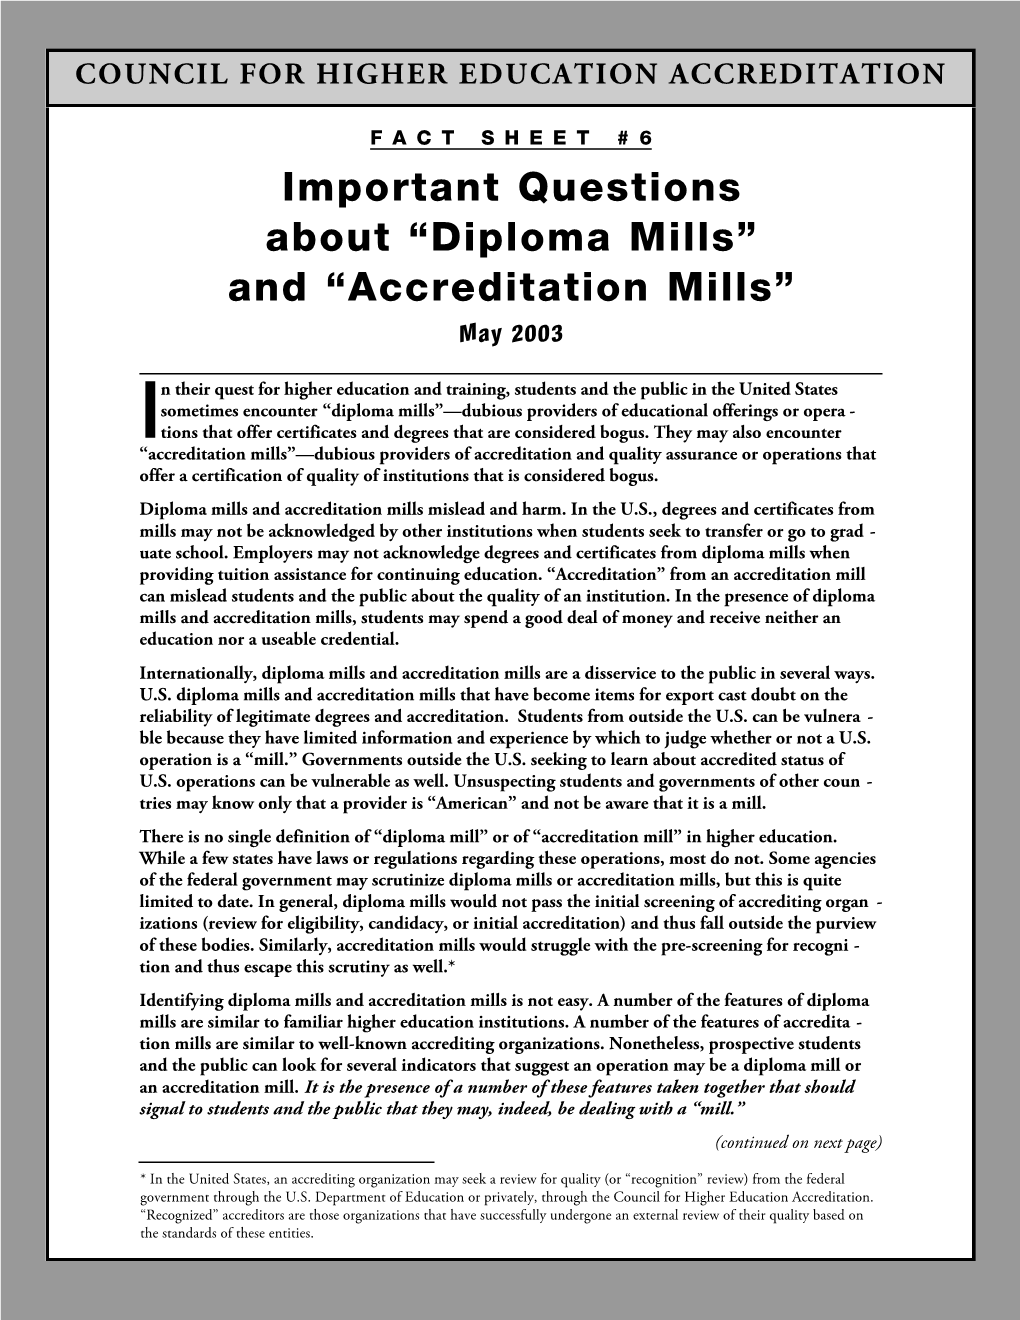 FACT SHEET #6 Important Questions About “Diploma Mills” and “Accreditation Mills” May 2003